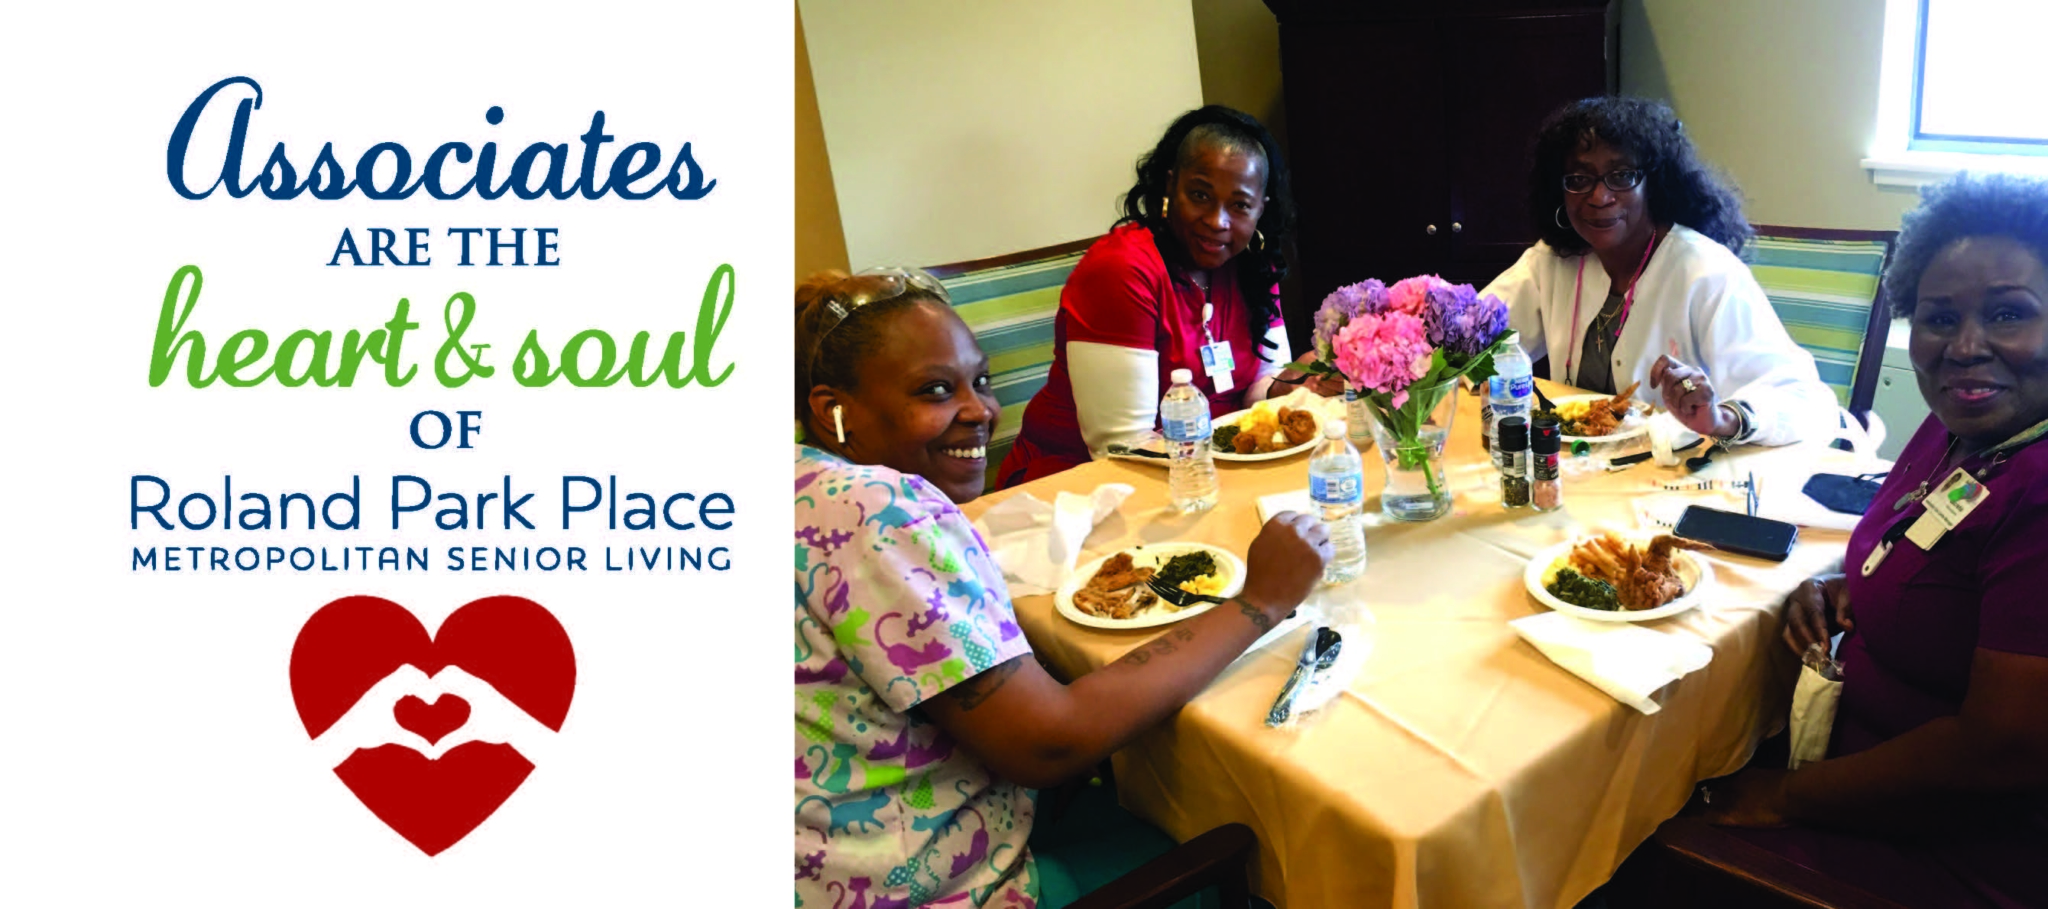 banner showing a group of associates enjoying a meal around a table at Roland Park Place with text on the left that reads "Associates are the heart and soul of Roland Park Place Metropolitan Senior Living"